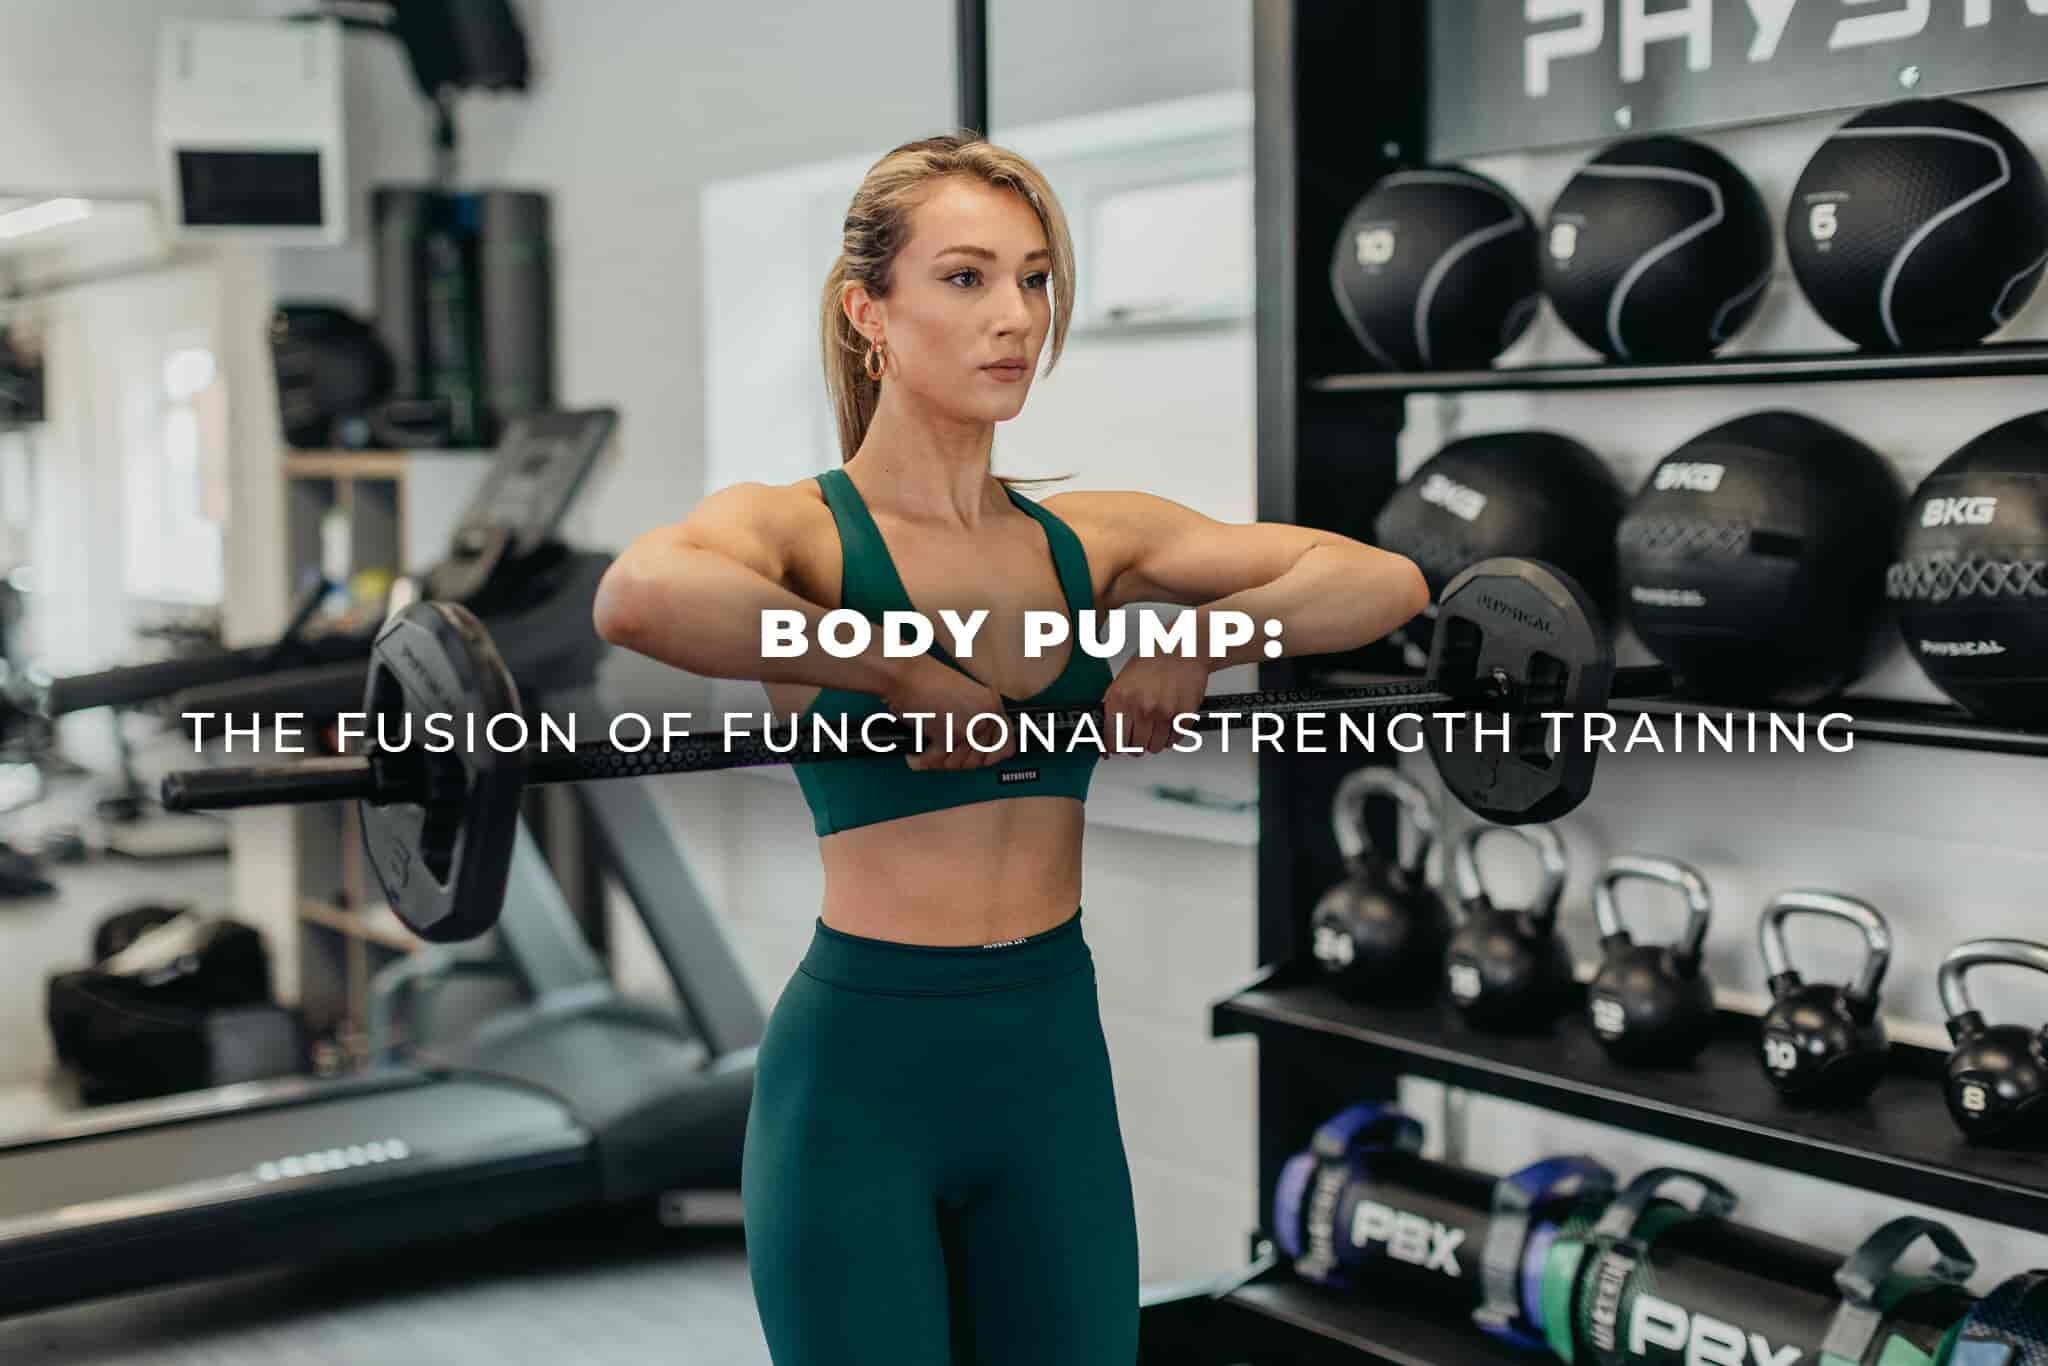 Body Pump: The fusion of functional strength training